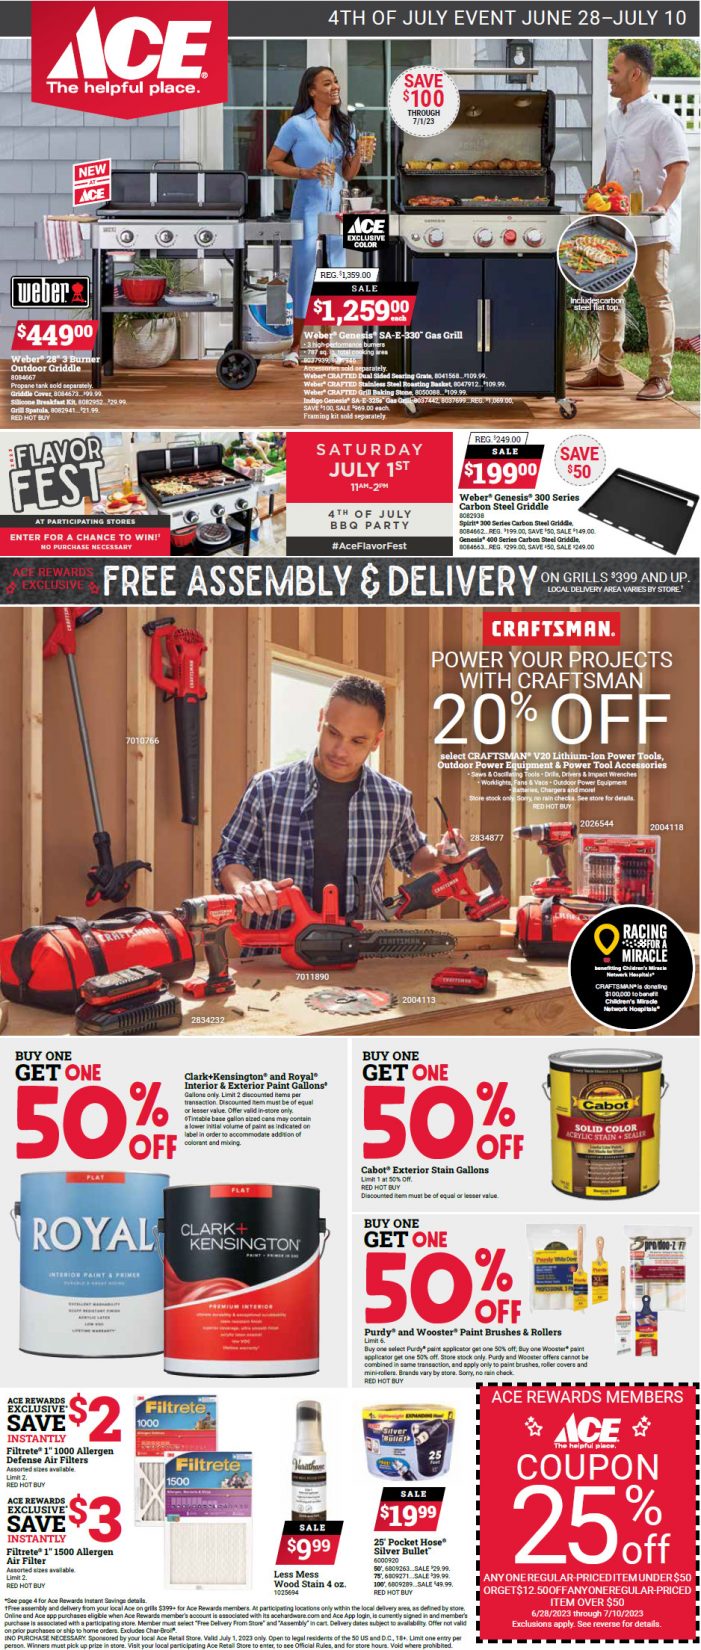 Sender’s Market Ace Hardware 4th of July Savings!  Shop Local & Save!